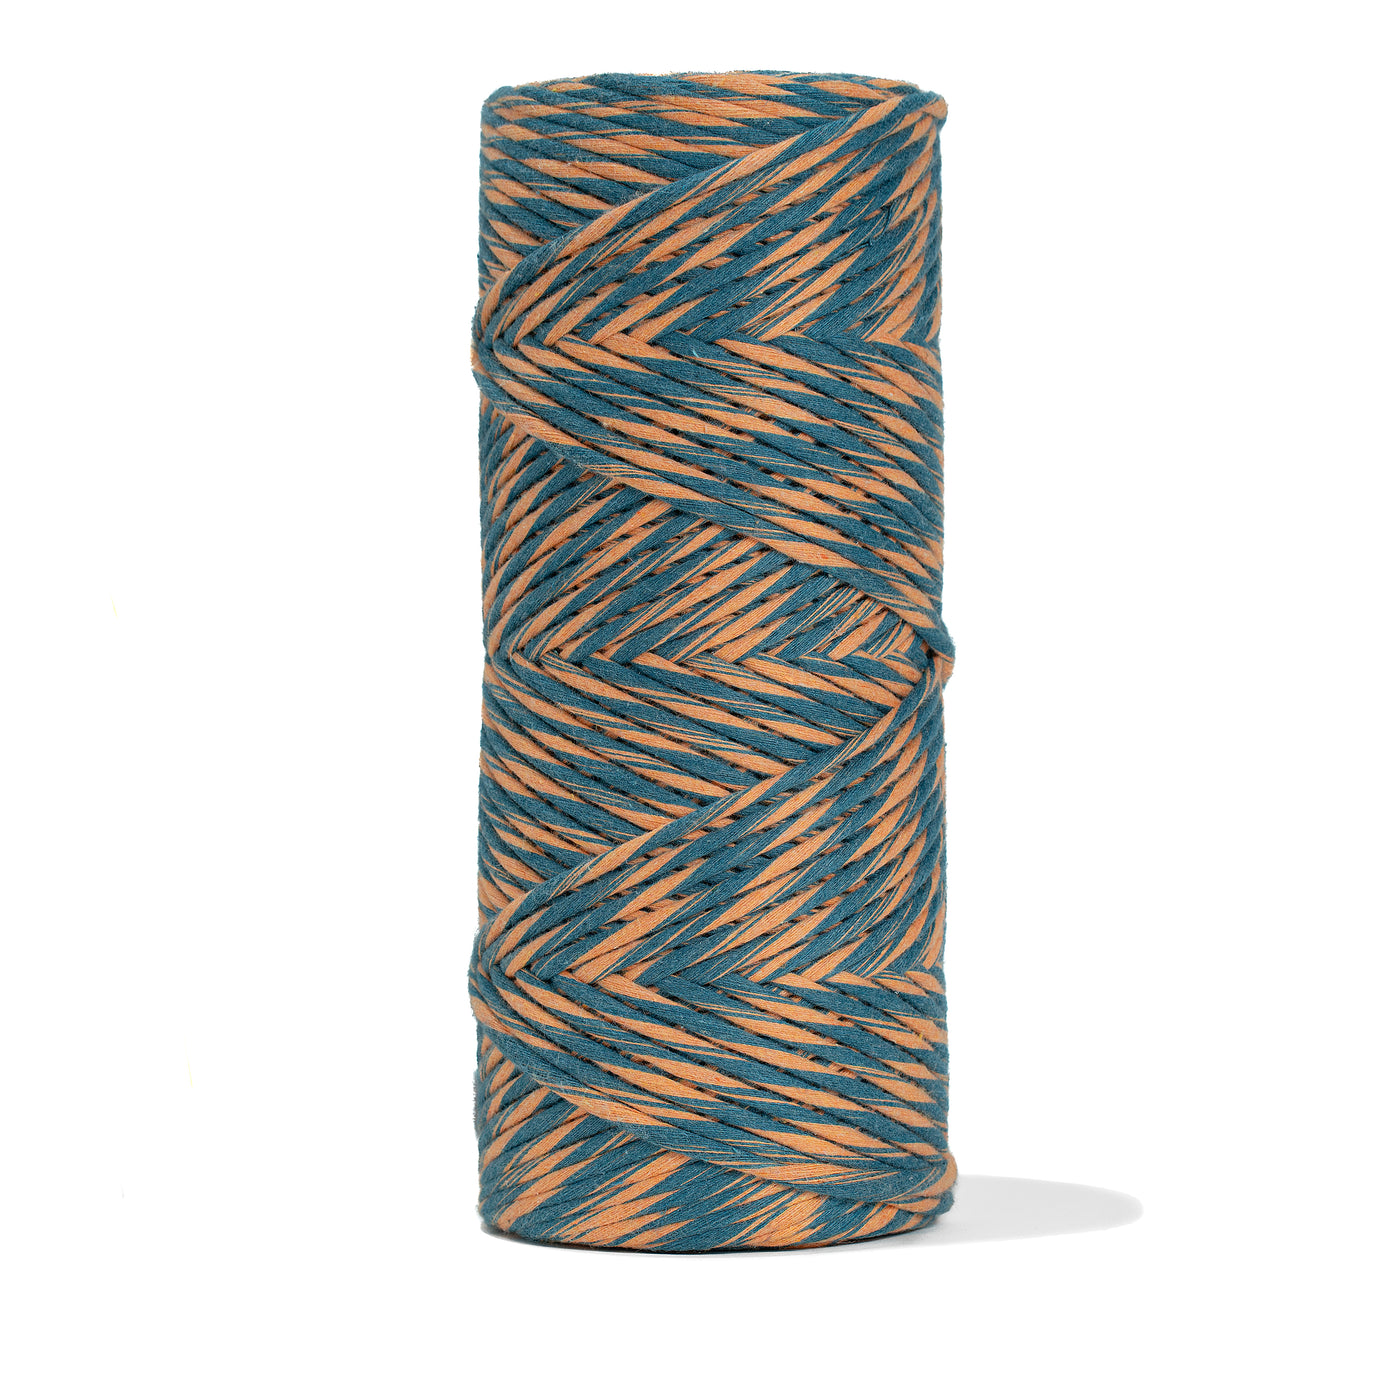 DUAL RECYCLED COTTON MACRAME CORD 4 MM - SINGLE STRAND - APRICOT + OCEAN TEAL COLOR